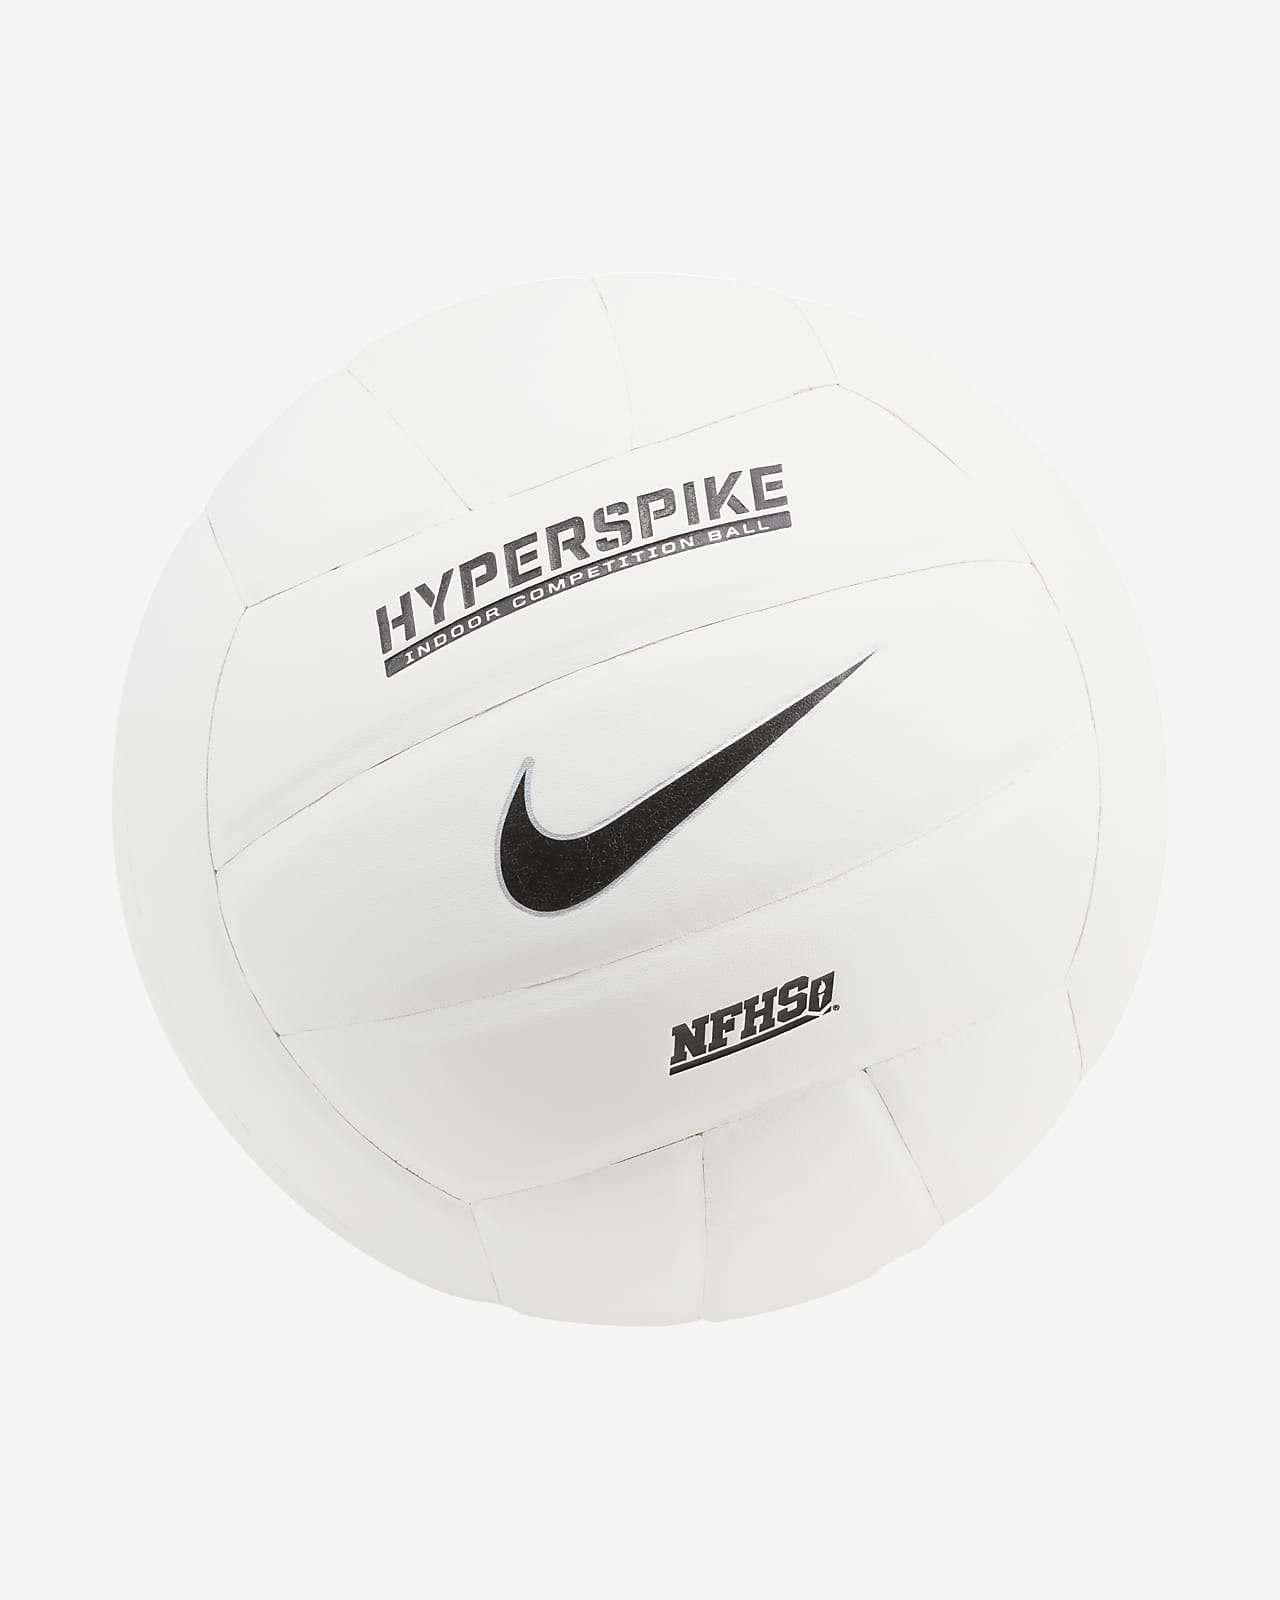 Nike HyperSpike 18P Volleyball